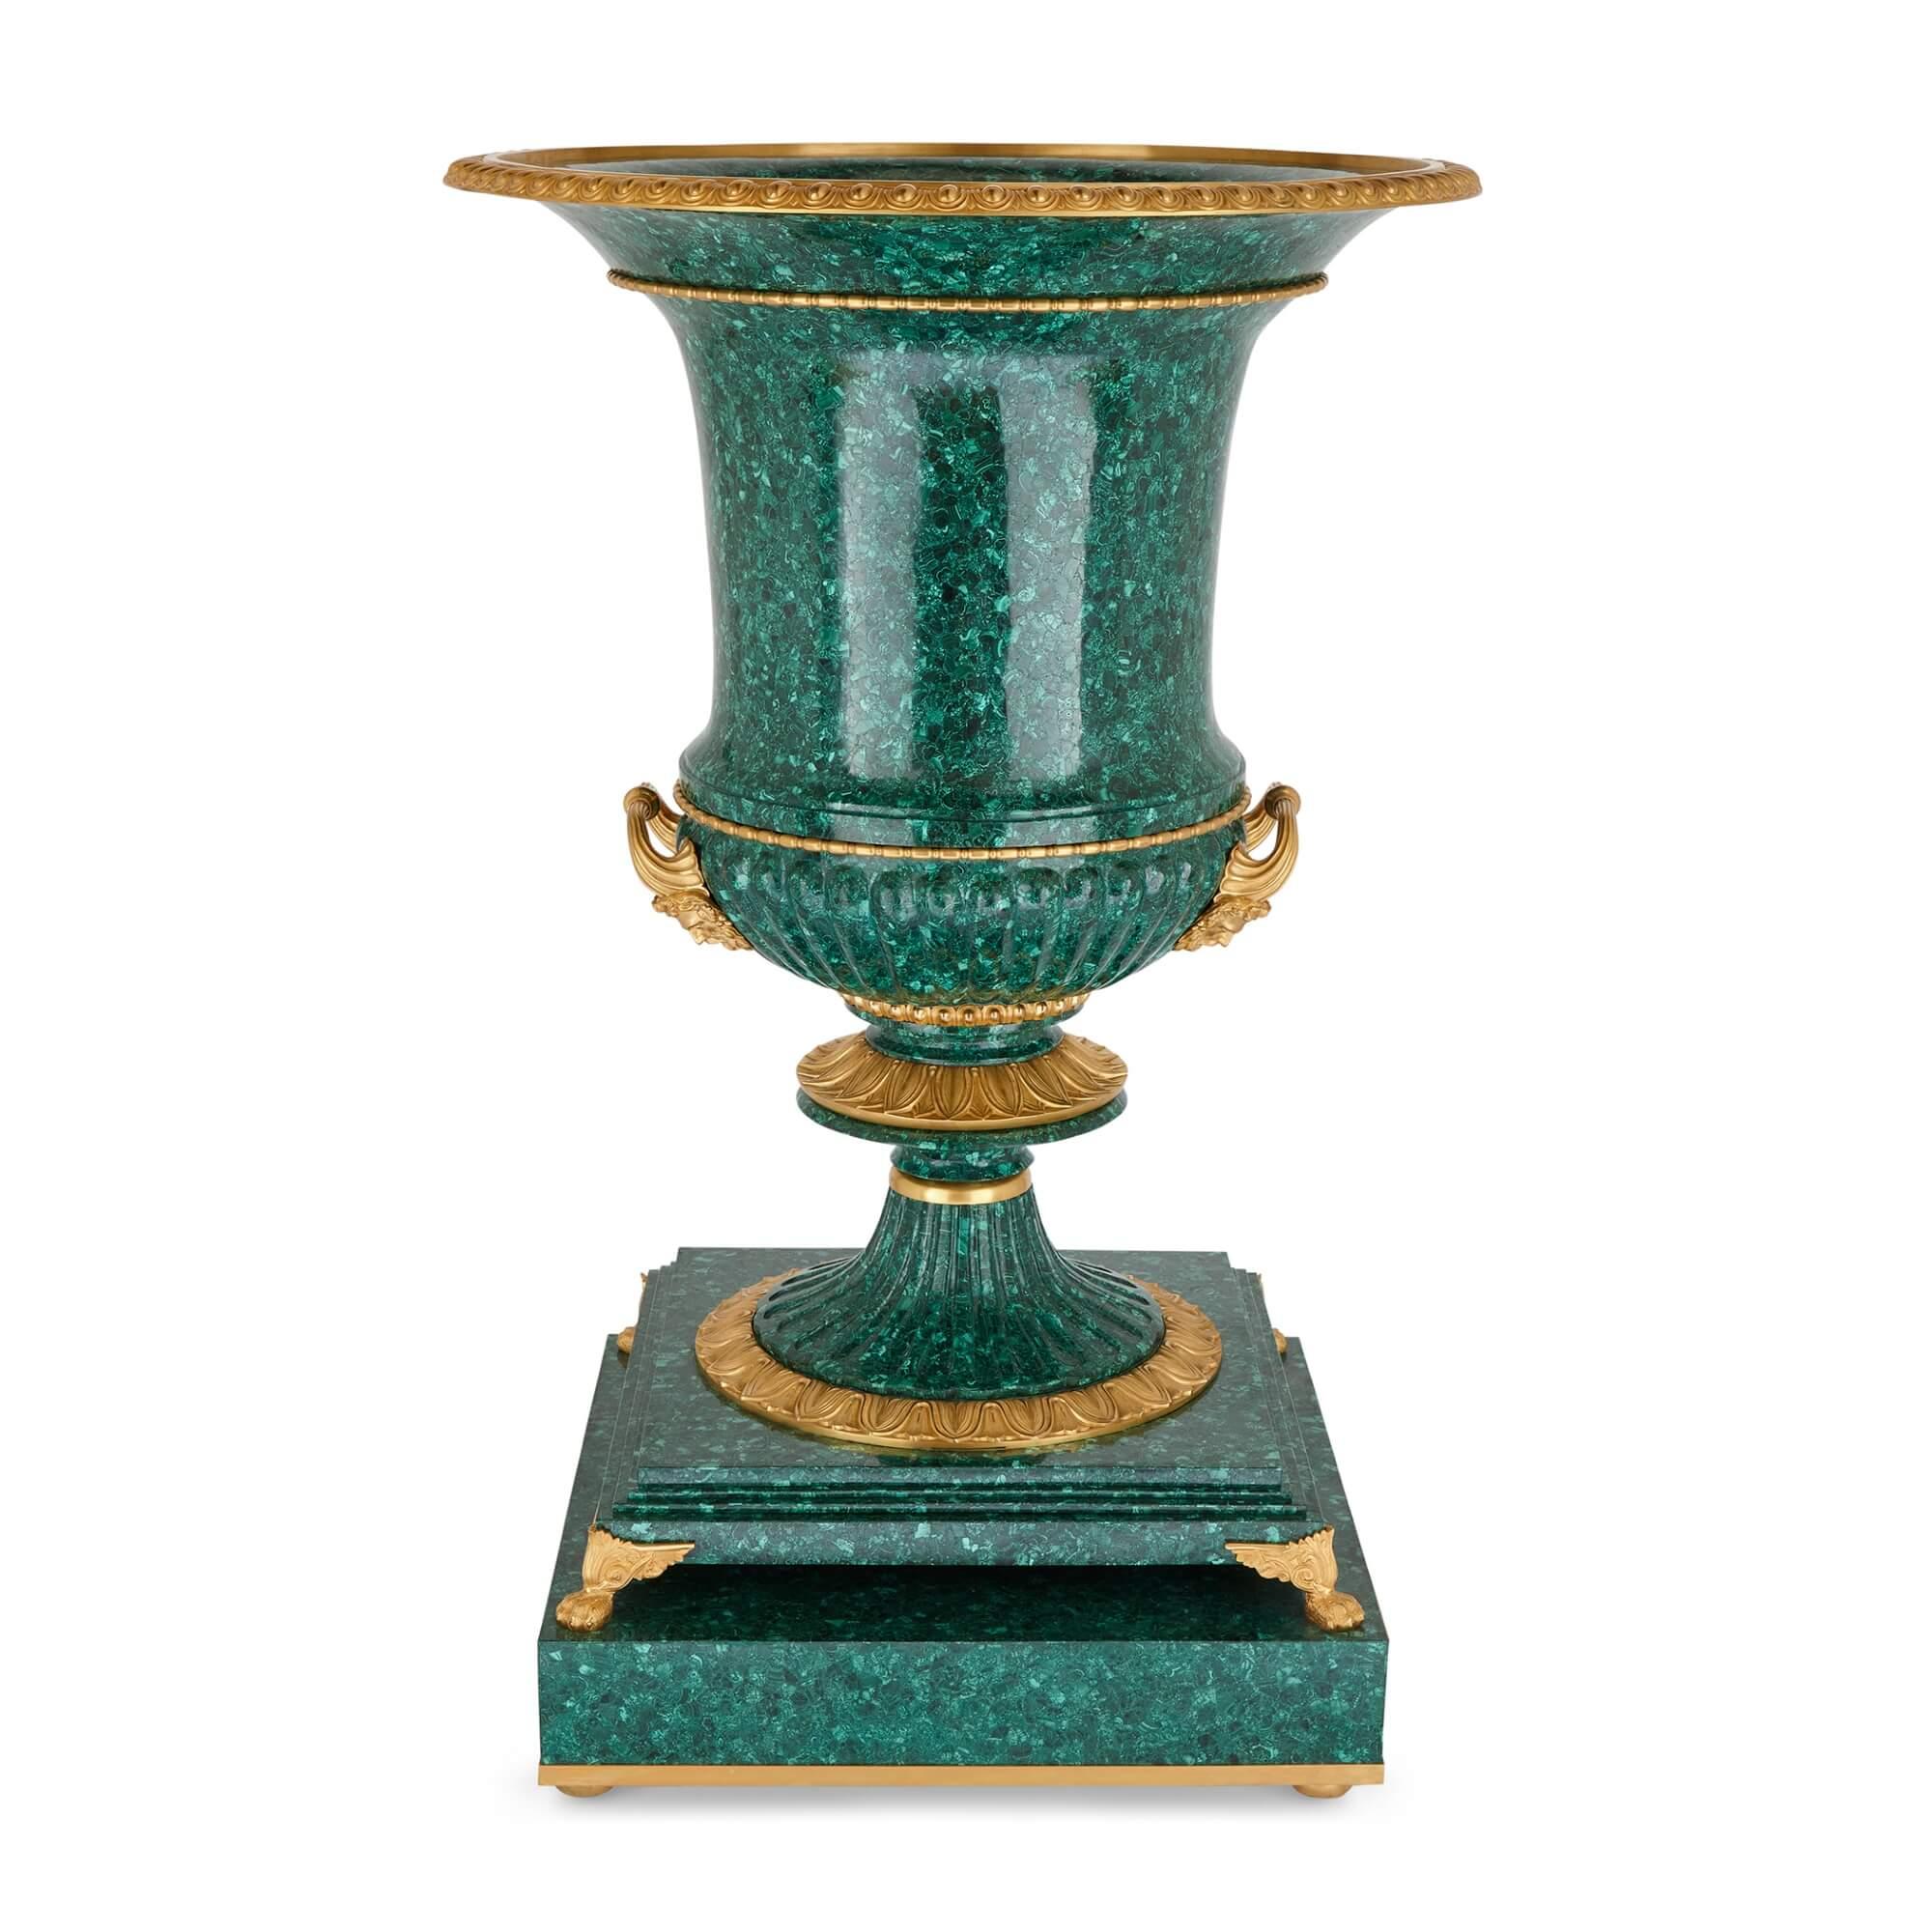 Pair of very large malachite and ormolu vases 
French, 20th Century 
Height 140cm, diameter 91cm

Of impressive size and quality, the vases are made from vibrant green malachite and ormolu. Of Campana form, the body of each vase is adorned with